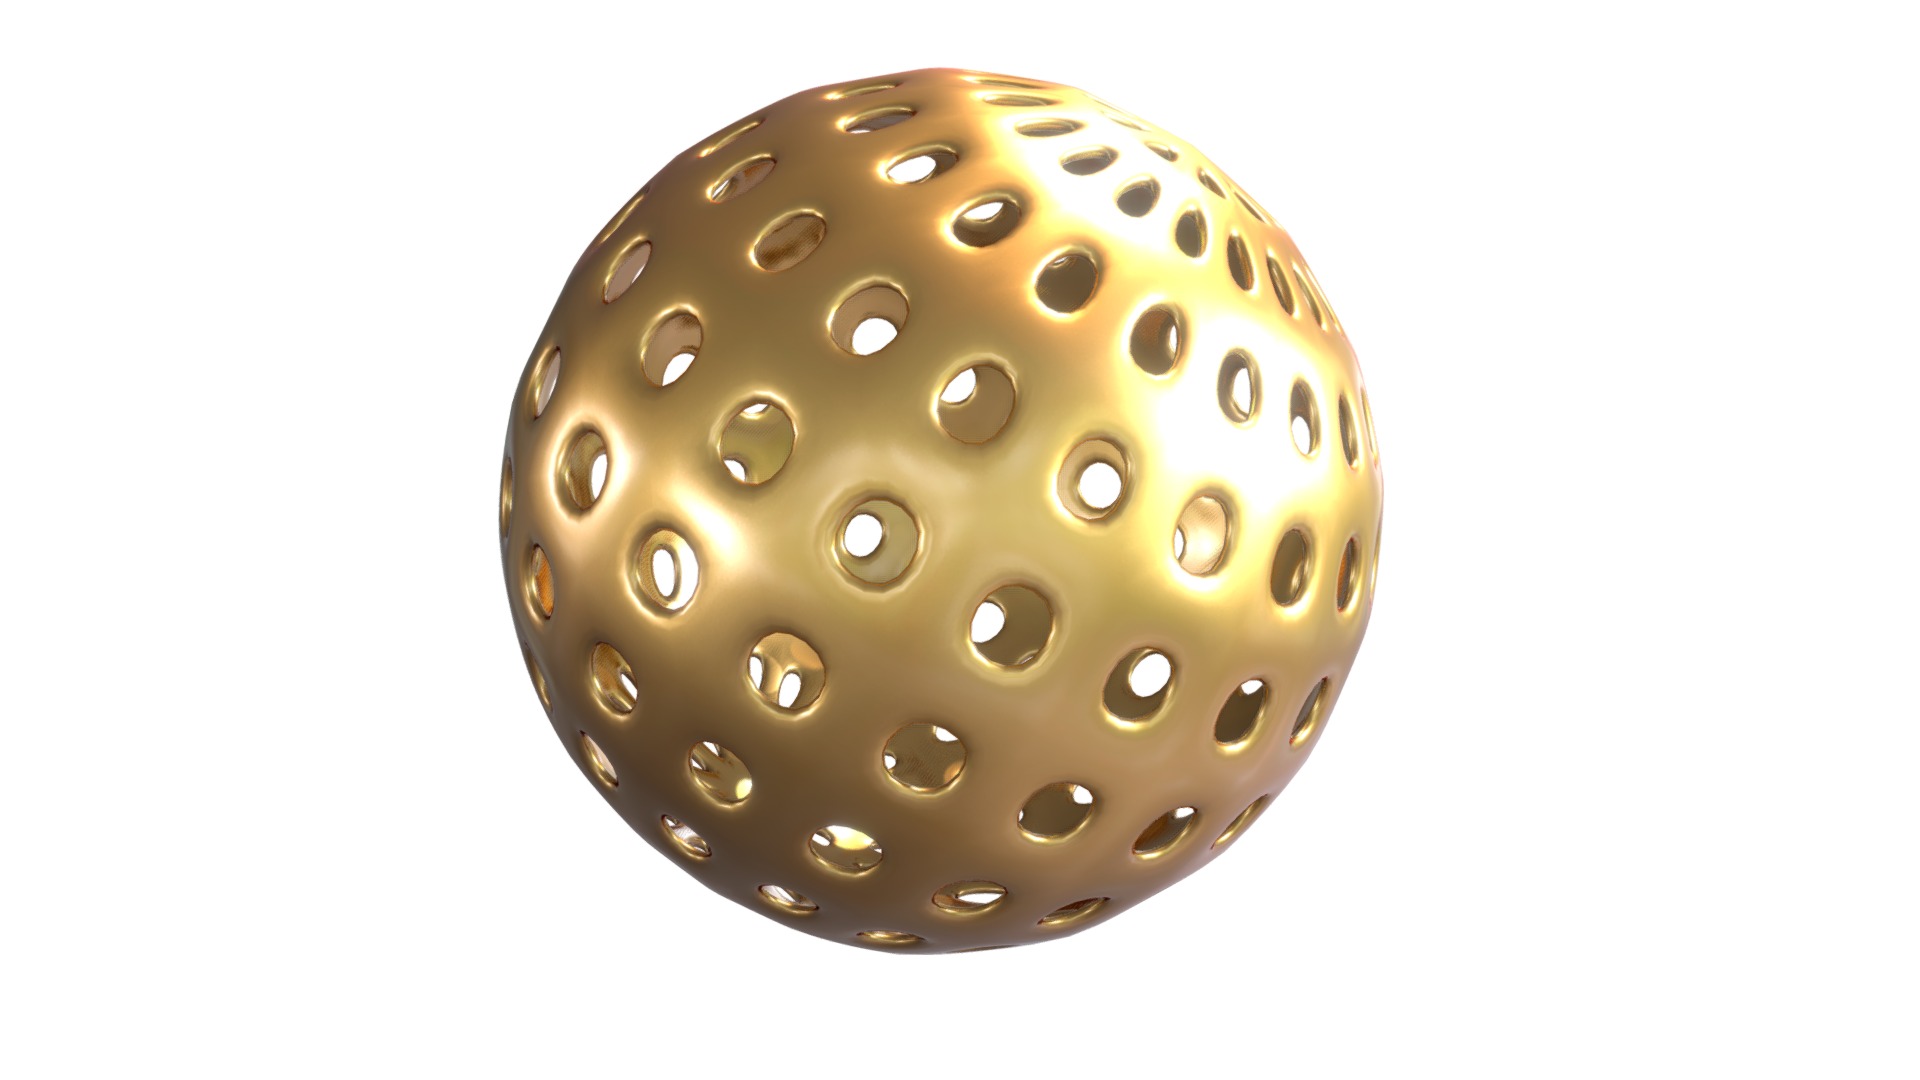 3D model Sphere Design - This is a 3D model of the Sphere Design. The 3D model is about a round gold object.